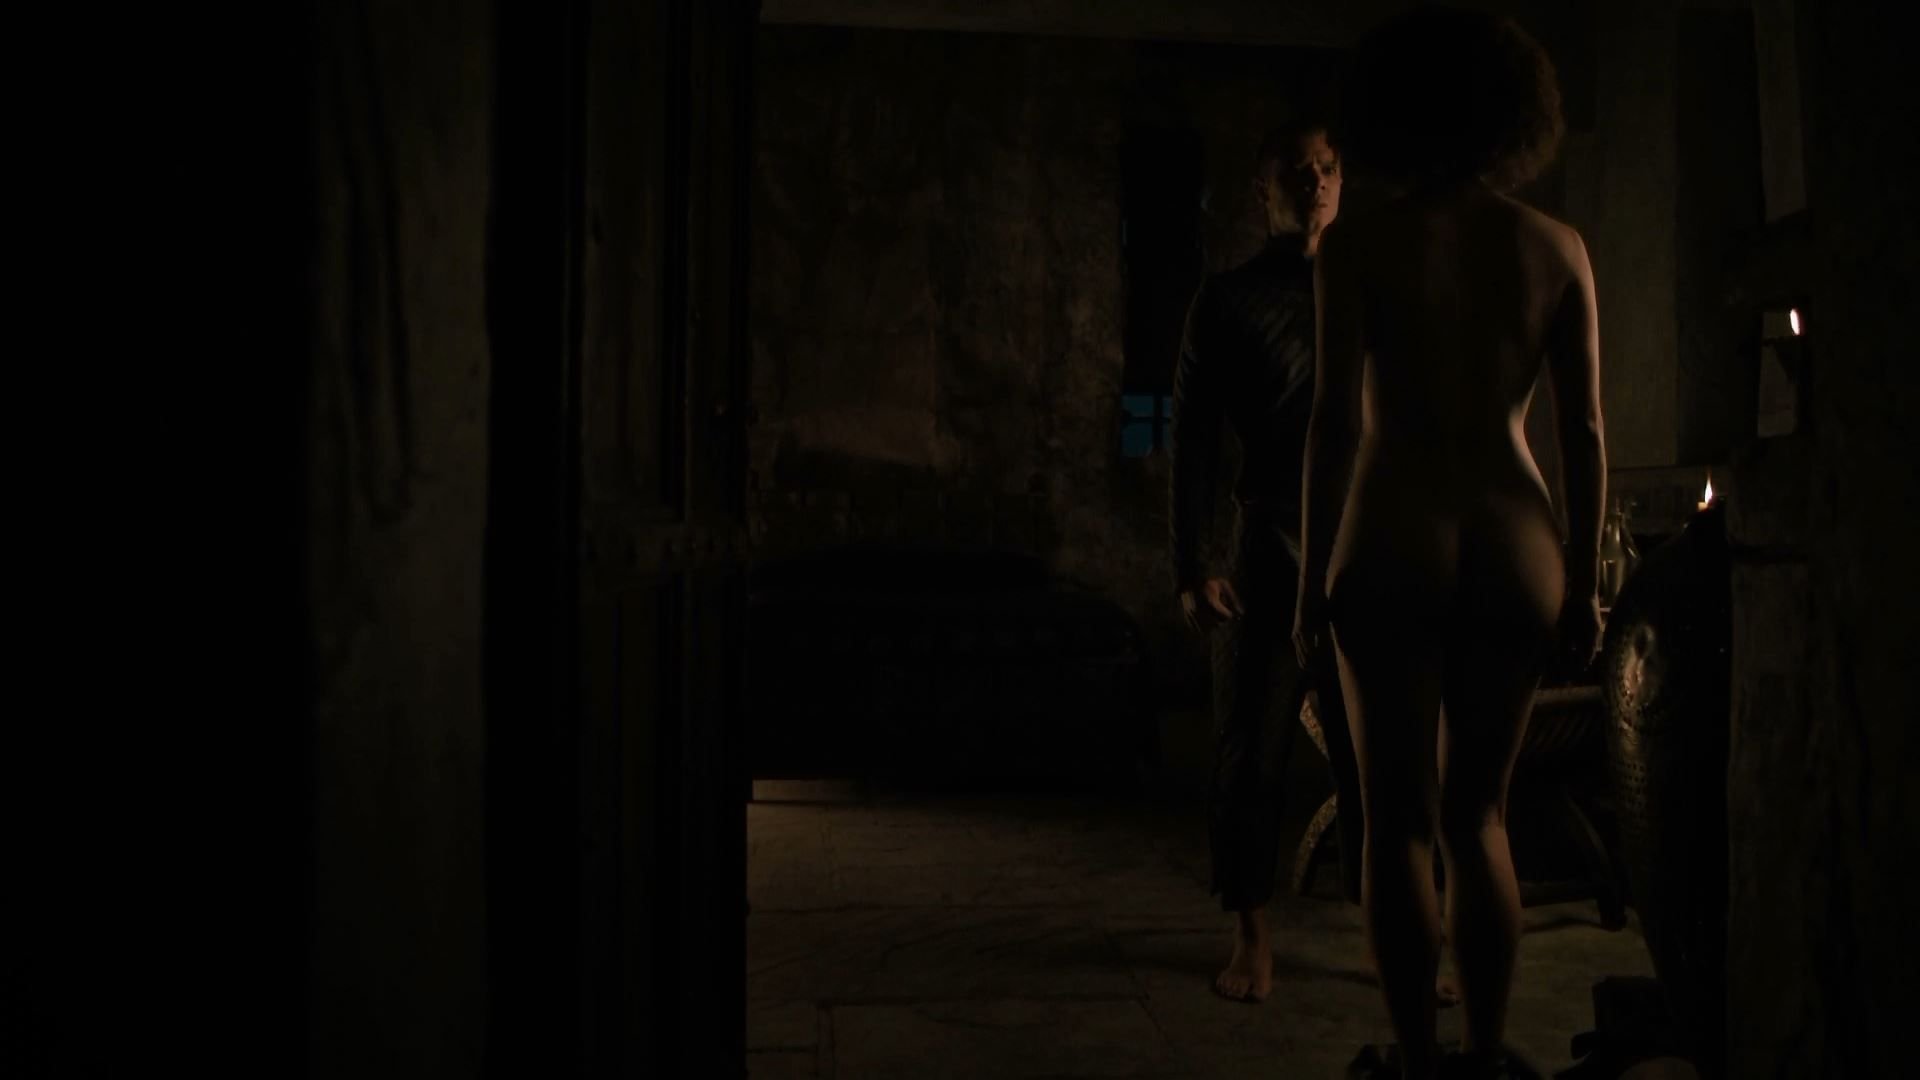 Nathalie Emmanuel Nude - Game of Thrones (2017) s07e02 - 1080p